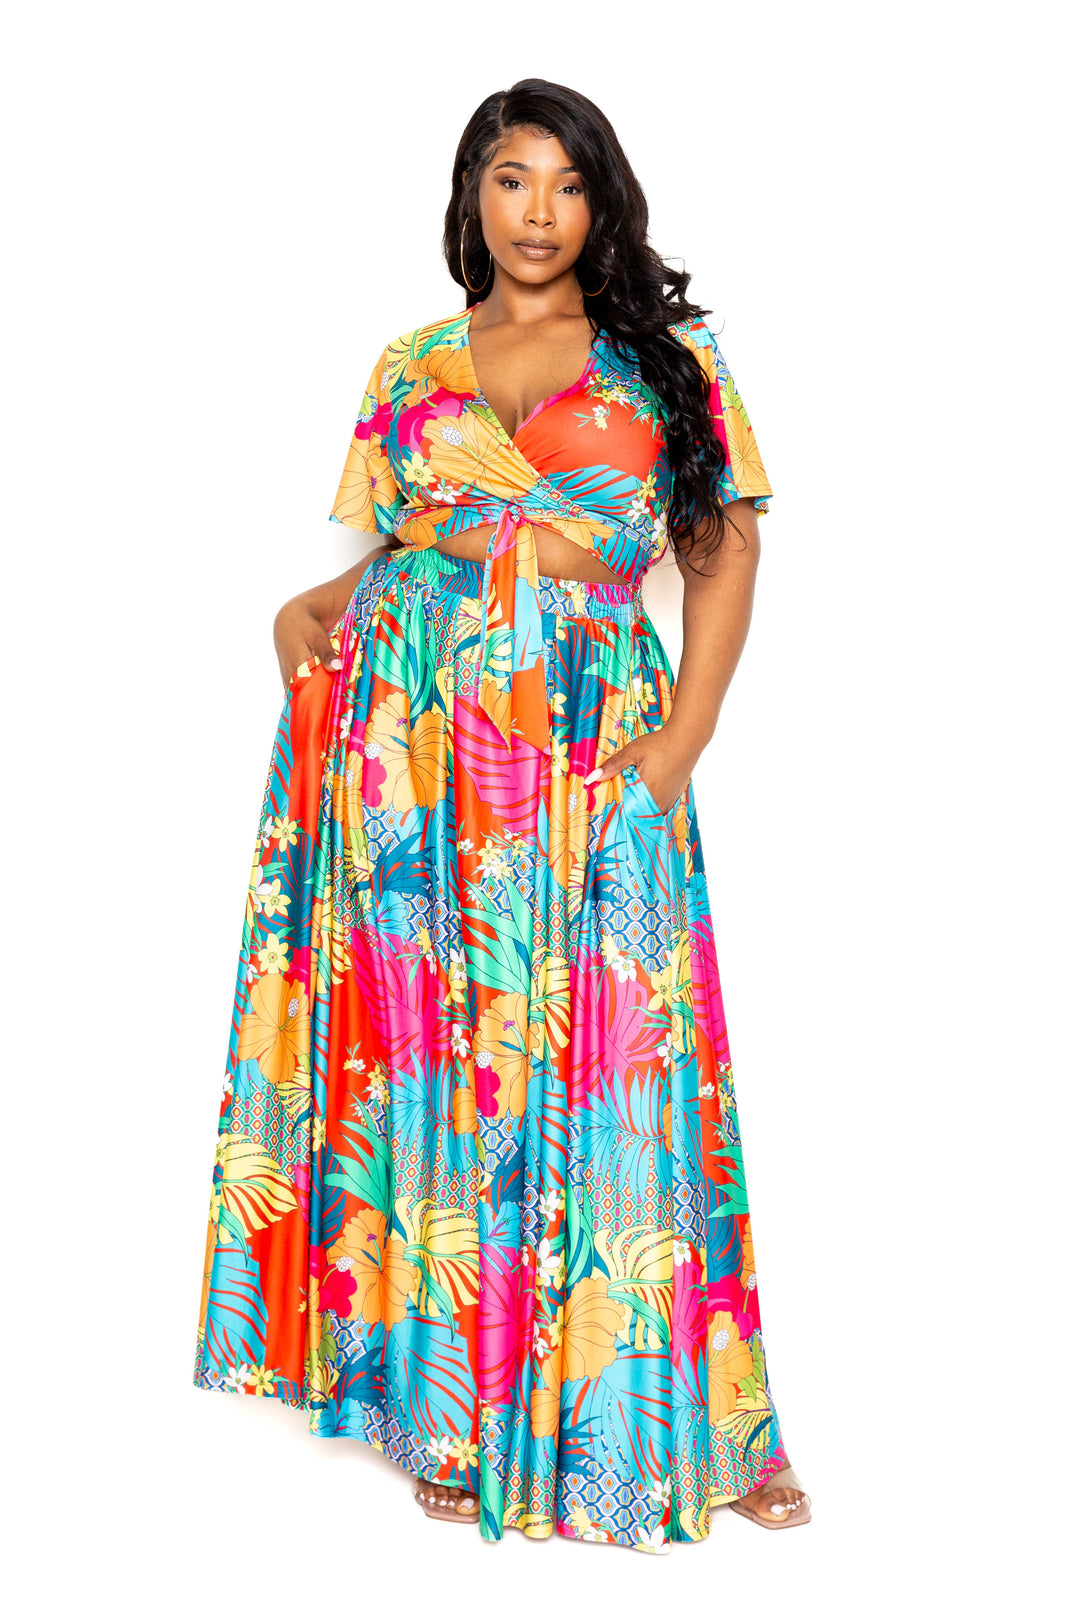 Buxom Couture Tropical Maxi Skirt & Top Set Outfit Sets RYSE Clothing Co. 1XL  